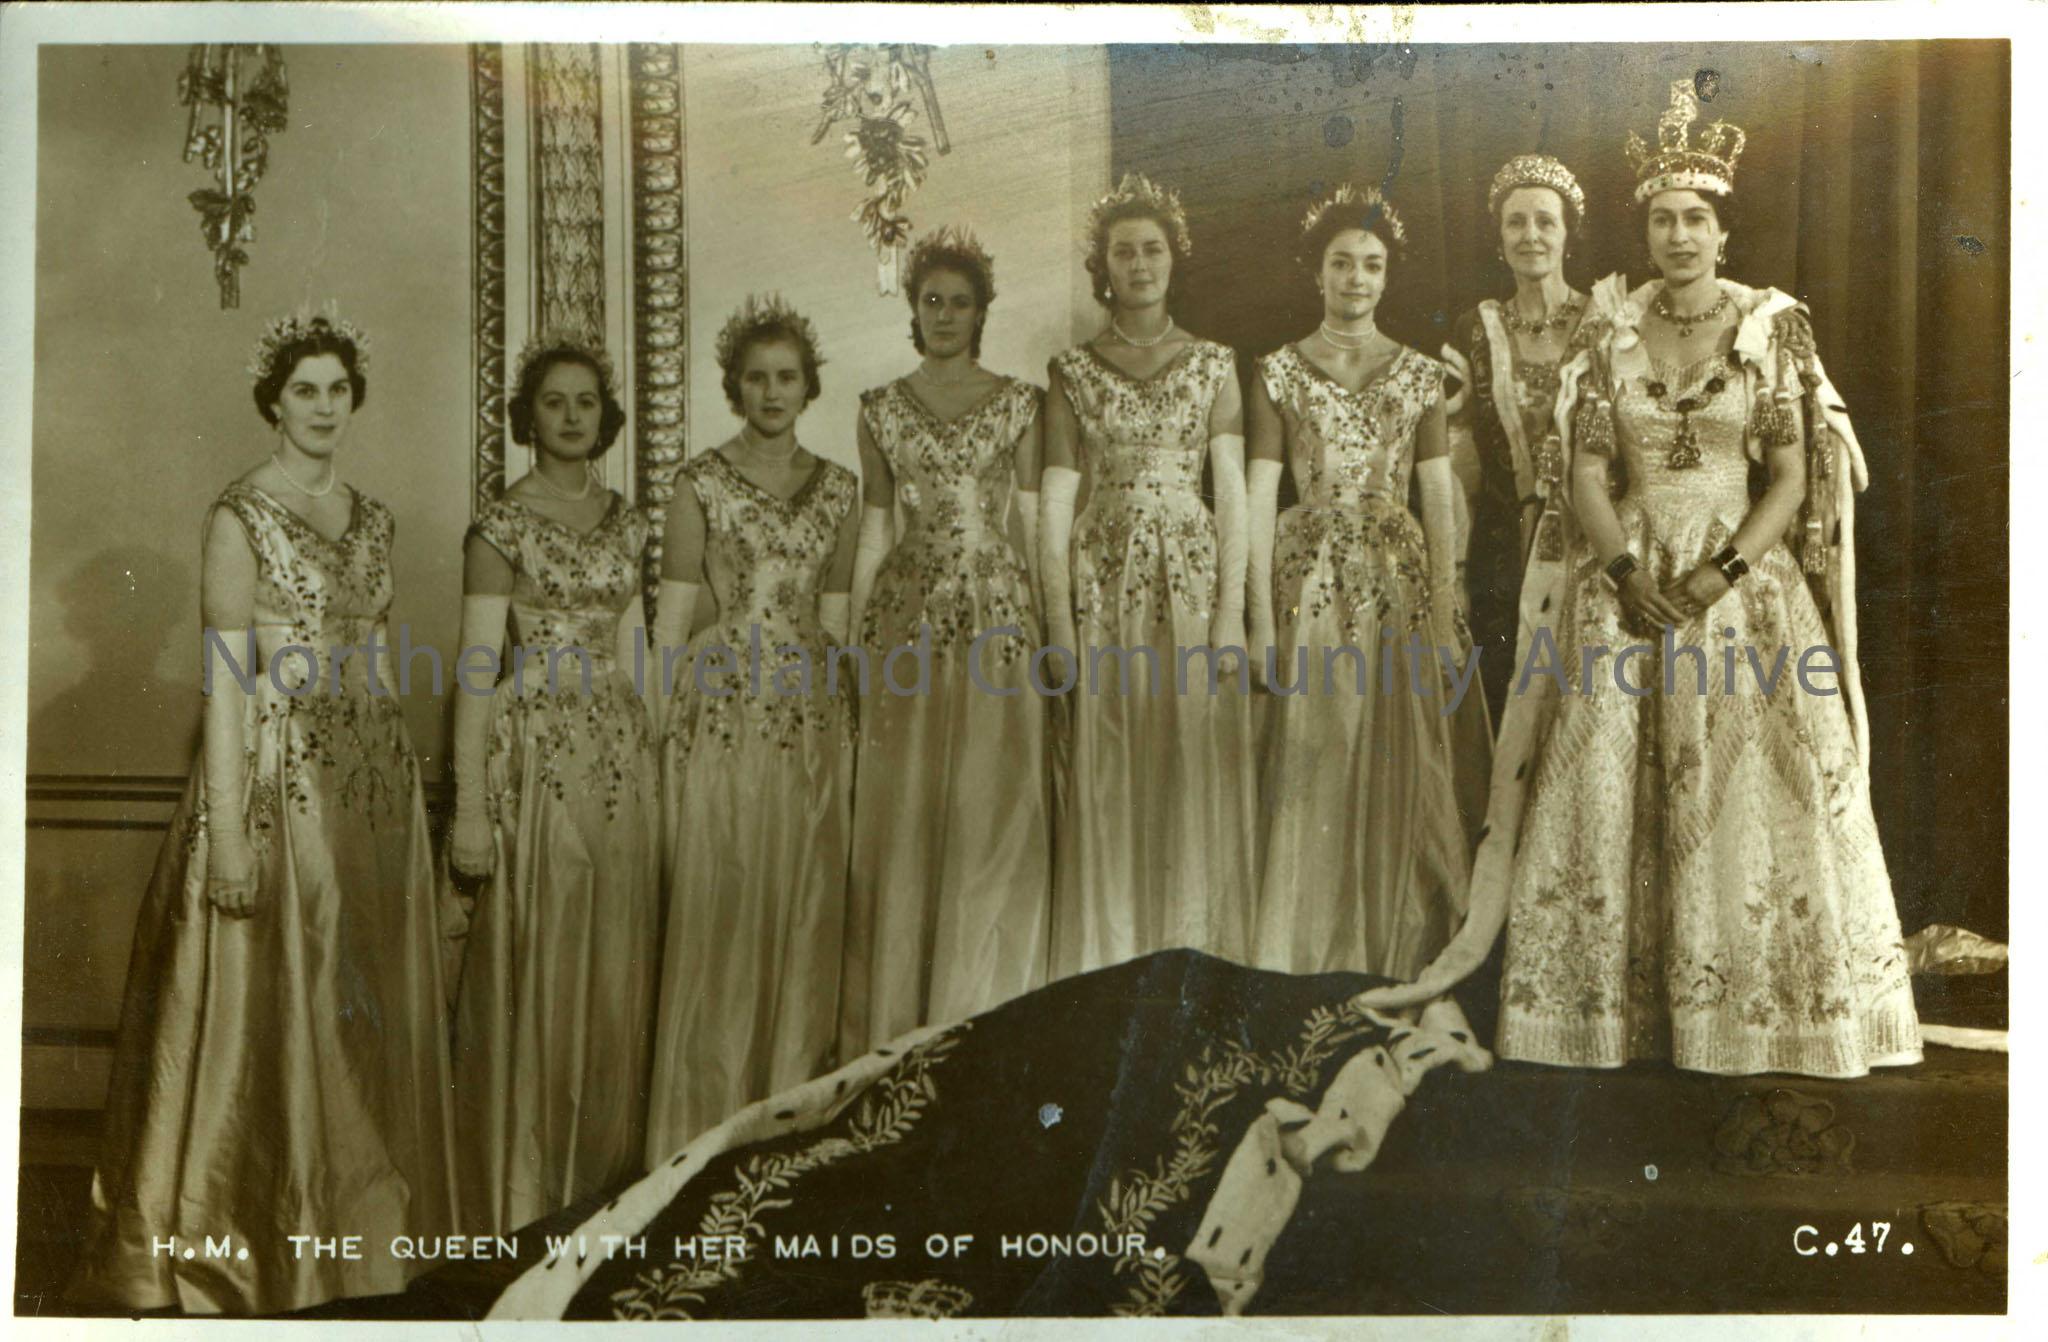 Valentine’s souvenir postcard of the Coronation of Queen Elizabeth II showing the Queen with her maids of Honour.